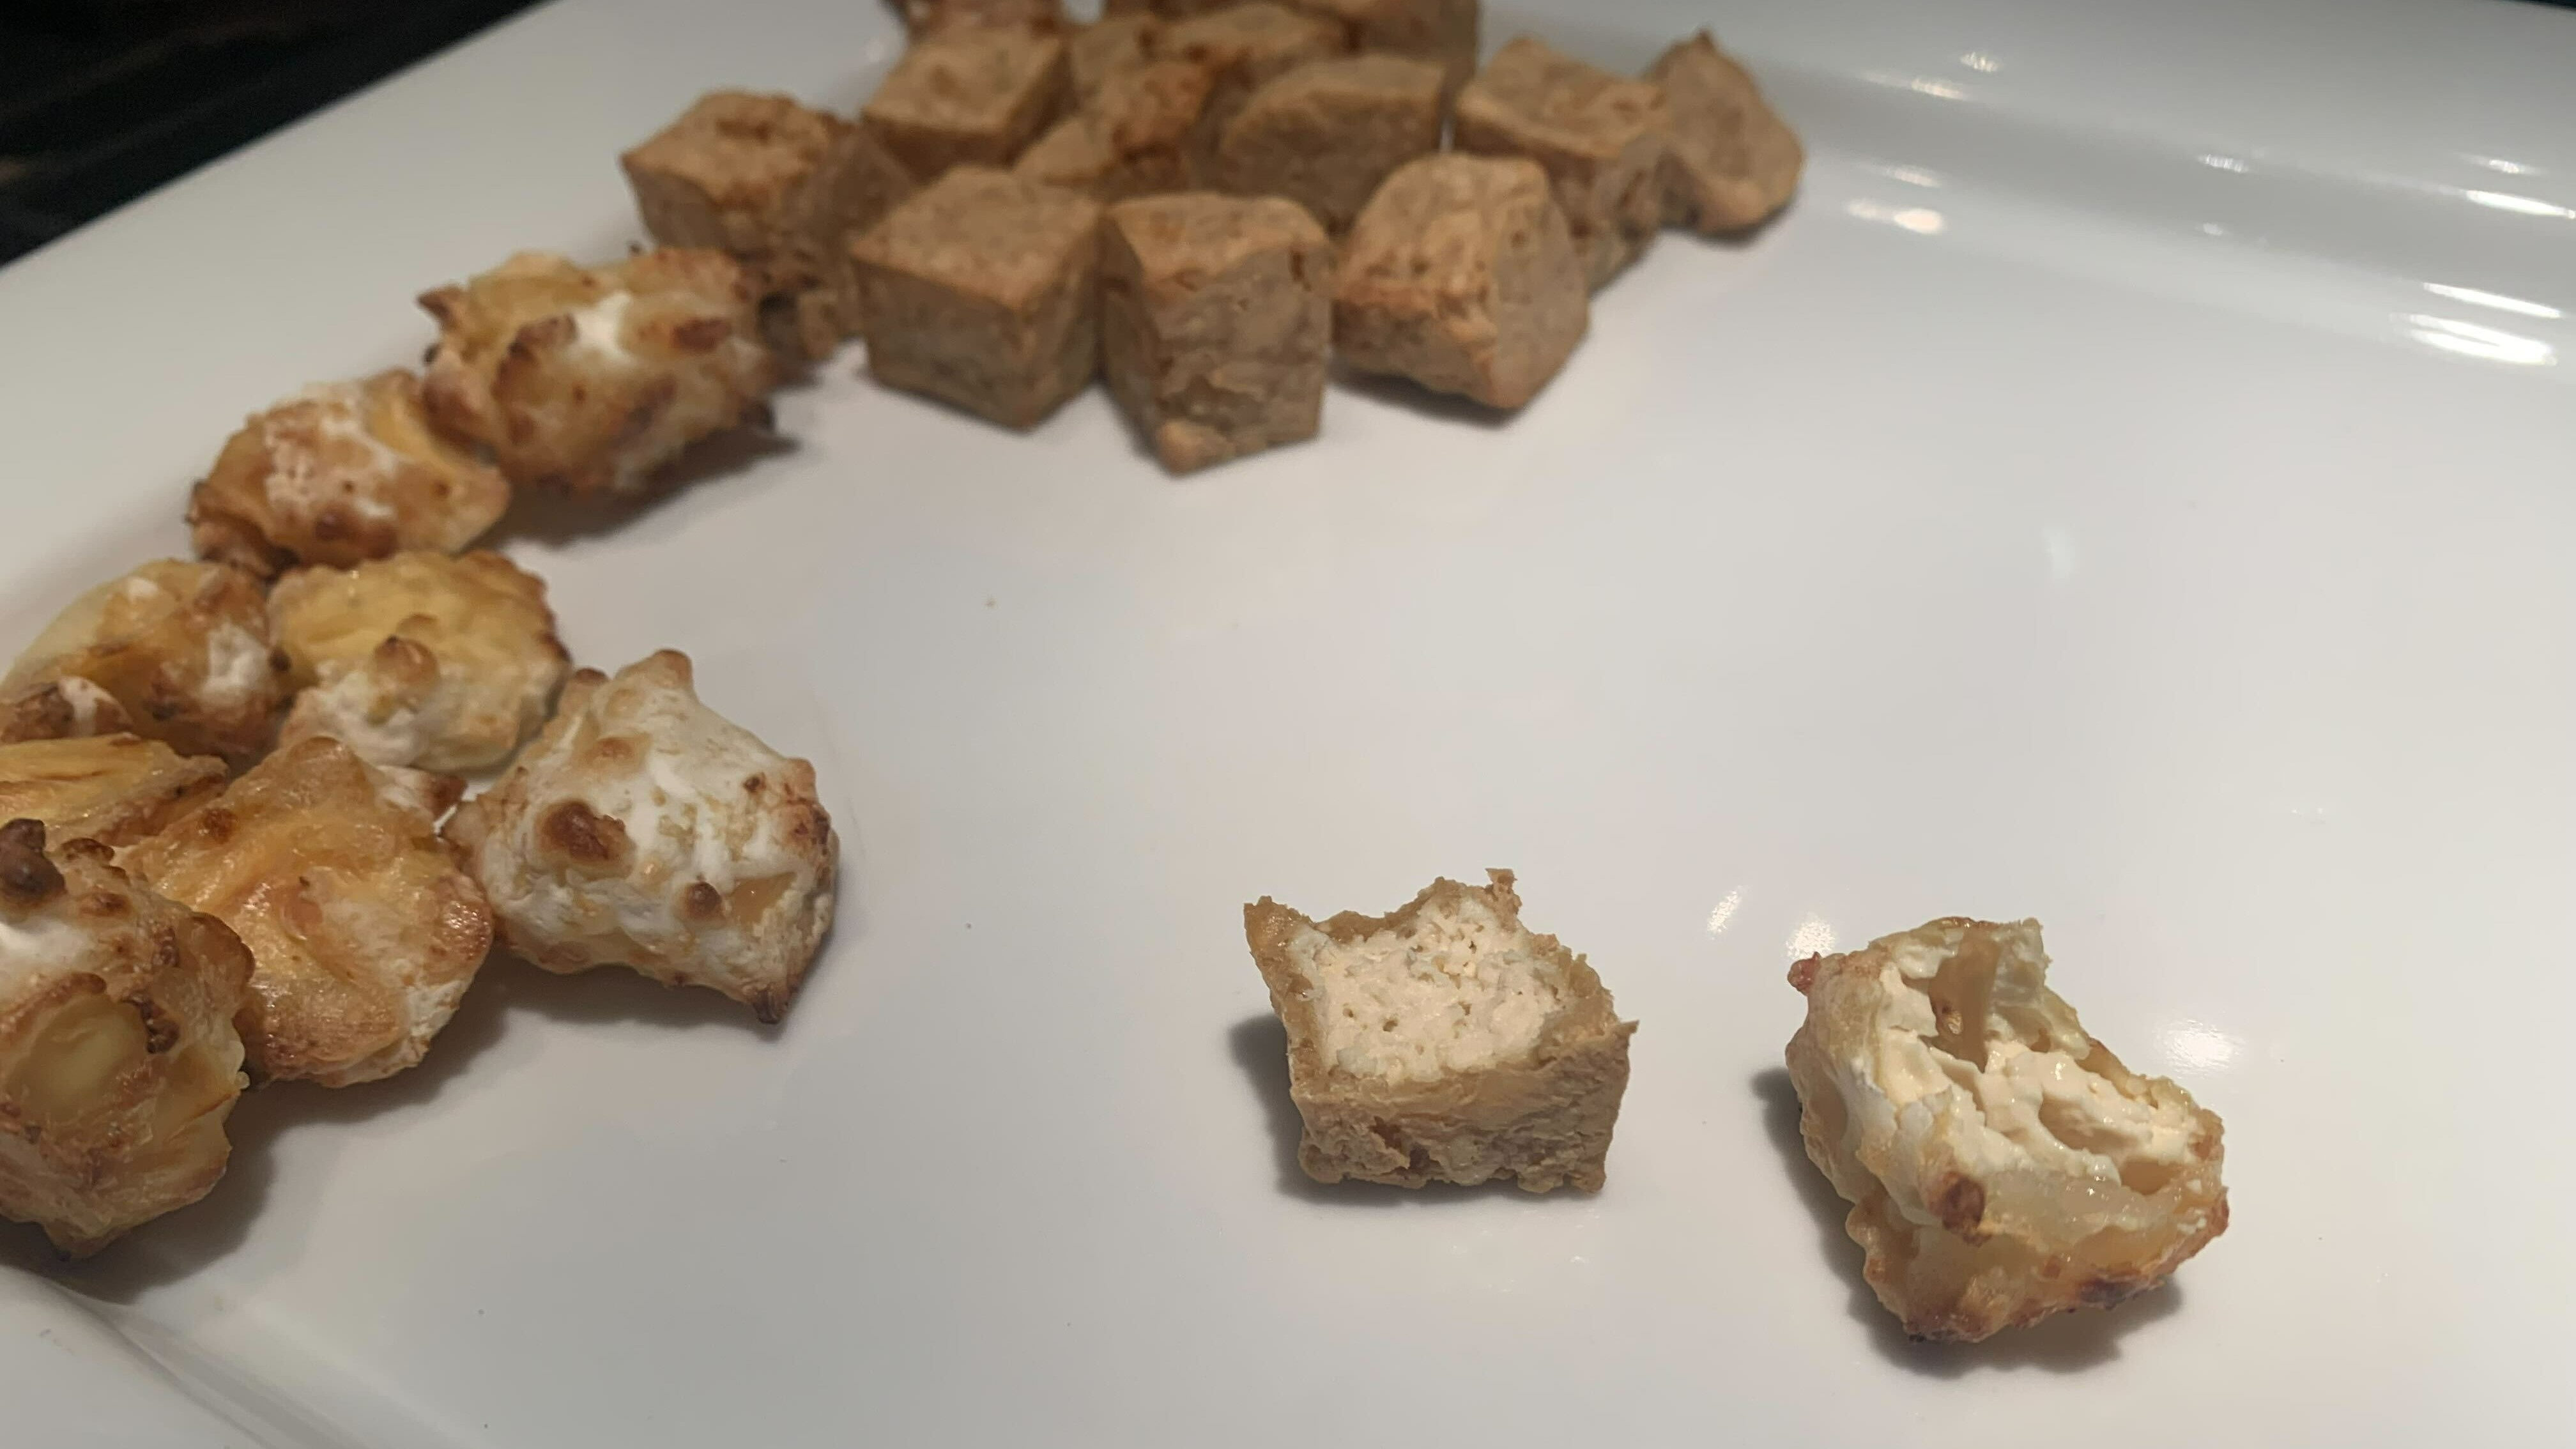 Cooked tofu. The silky tofu (right) has layers and a thinner crisp. The spongier tofu (left) has a thicker crust and denser tofu texture